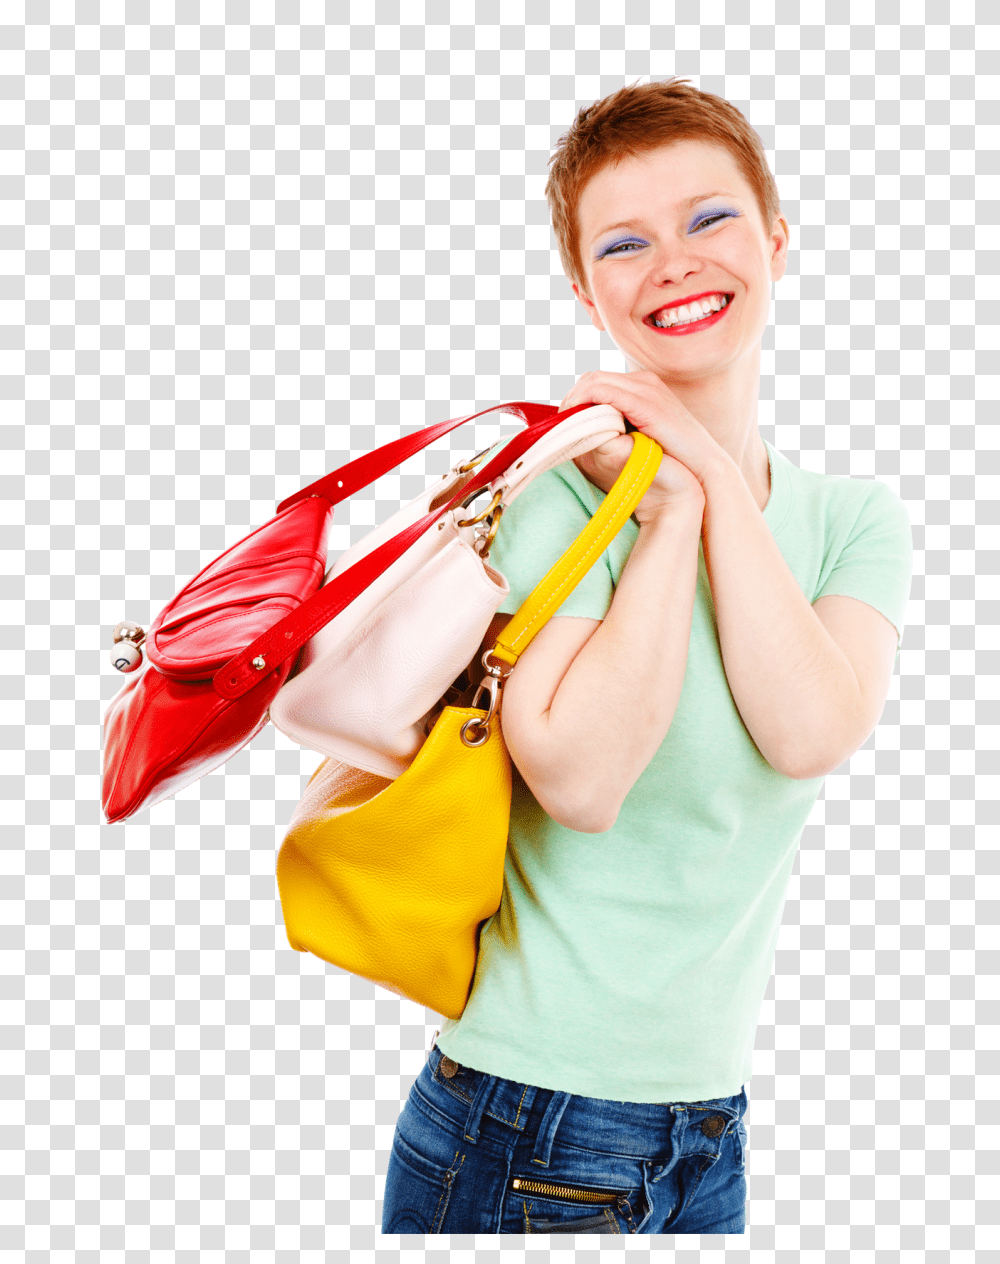 Fashion Woman Holding Handbags Image, Person, Human, Accessories, Accessory Transparent Png